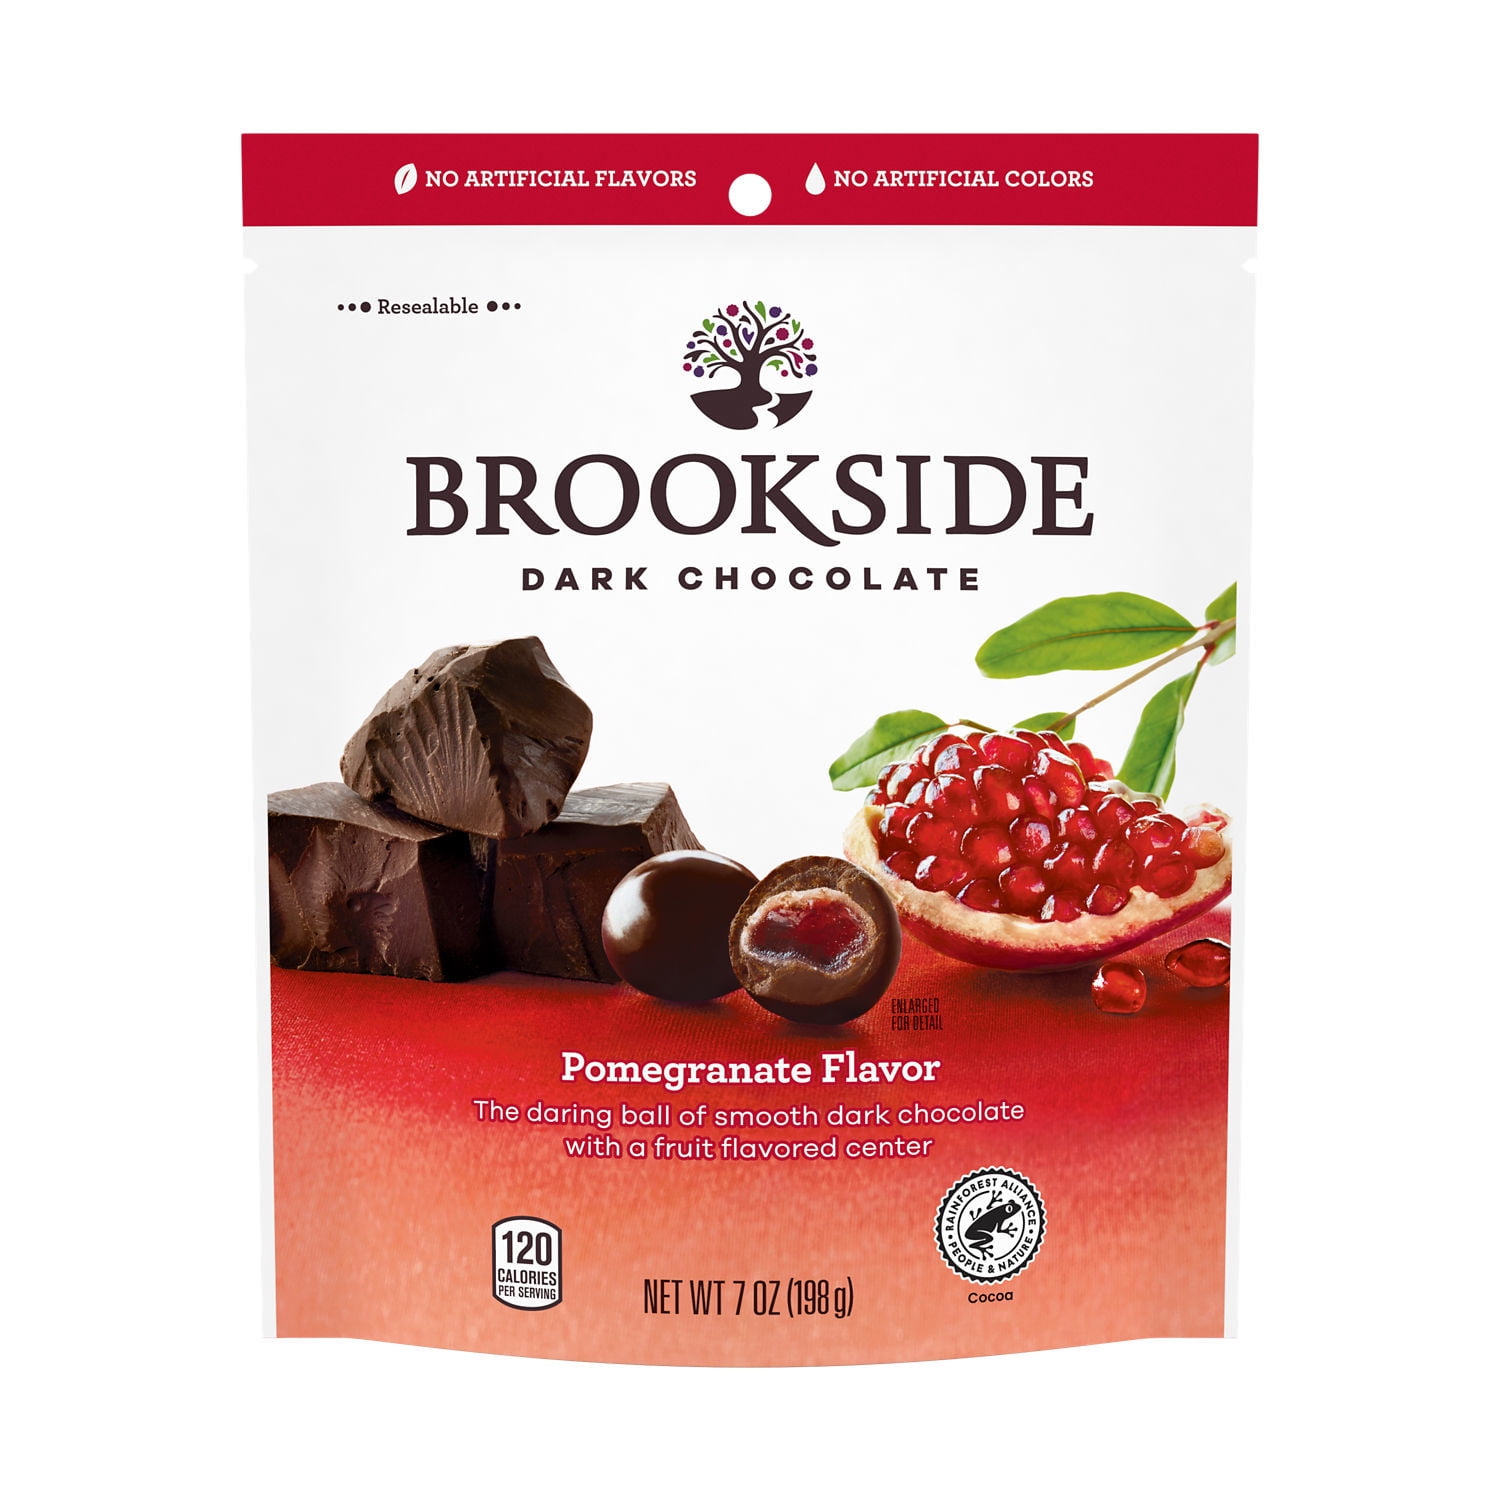 BROOKSIDE Dark Chocolate Pomegranate Flavored Chewy Center, Gluten Free Snacking Chocolate Bag, 7 oz